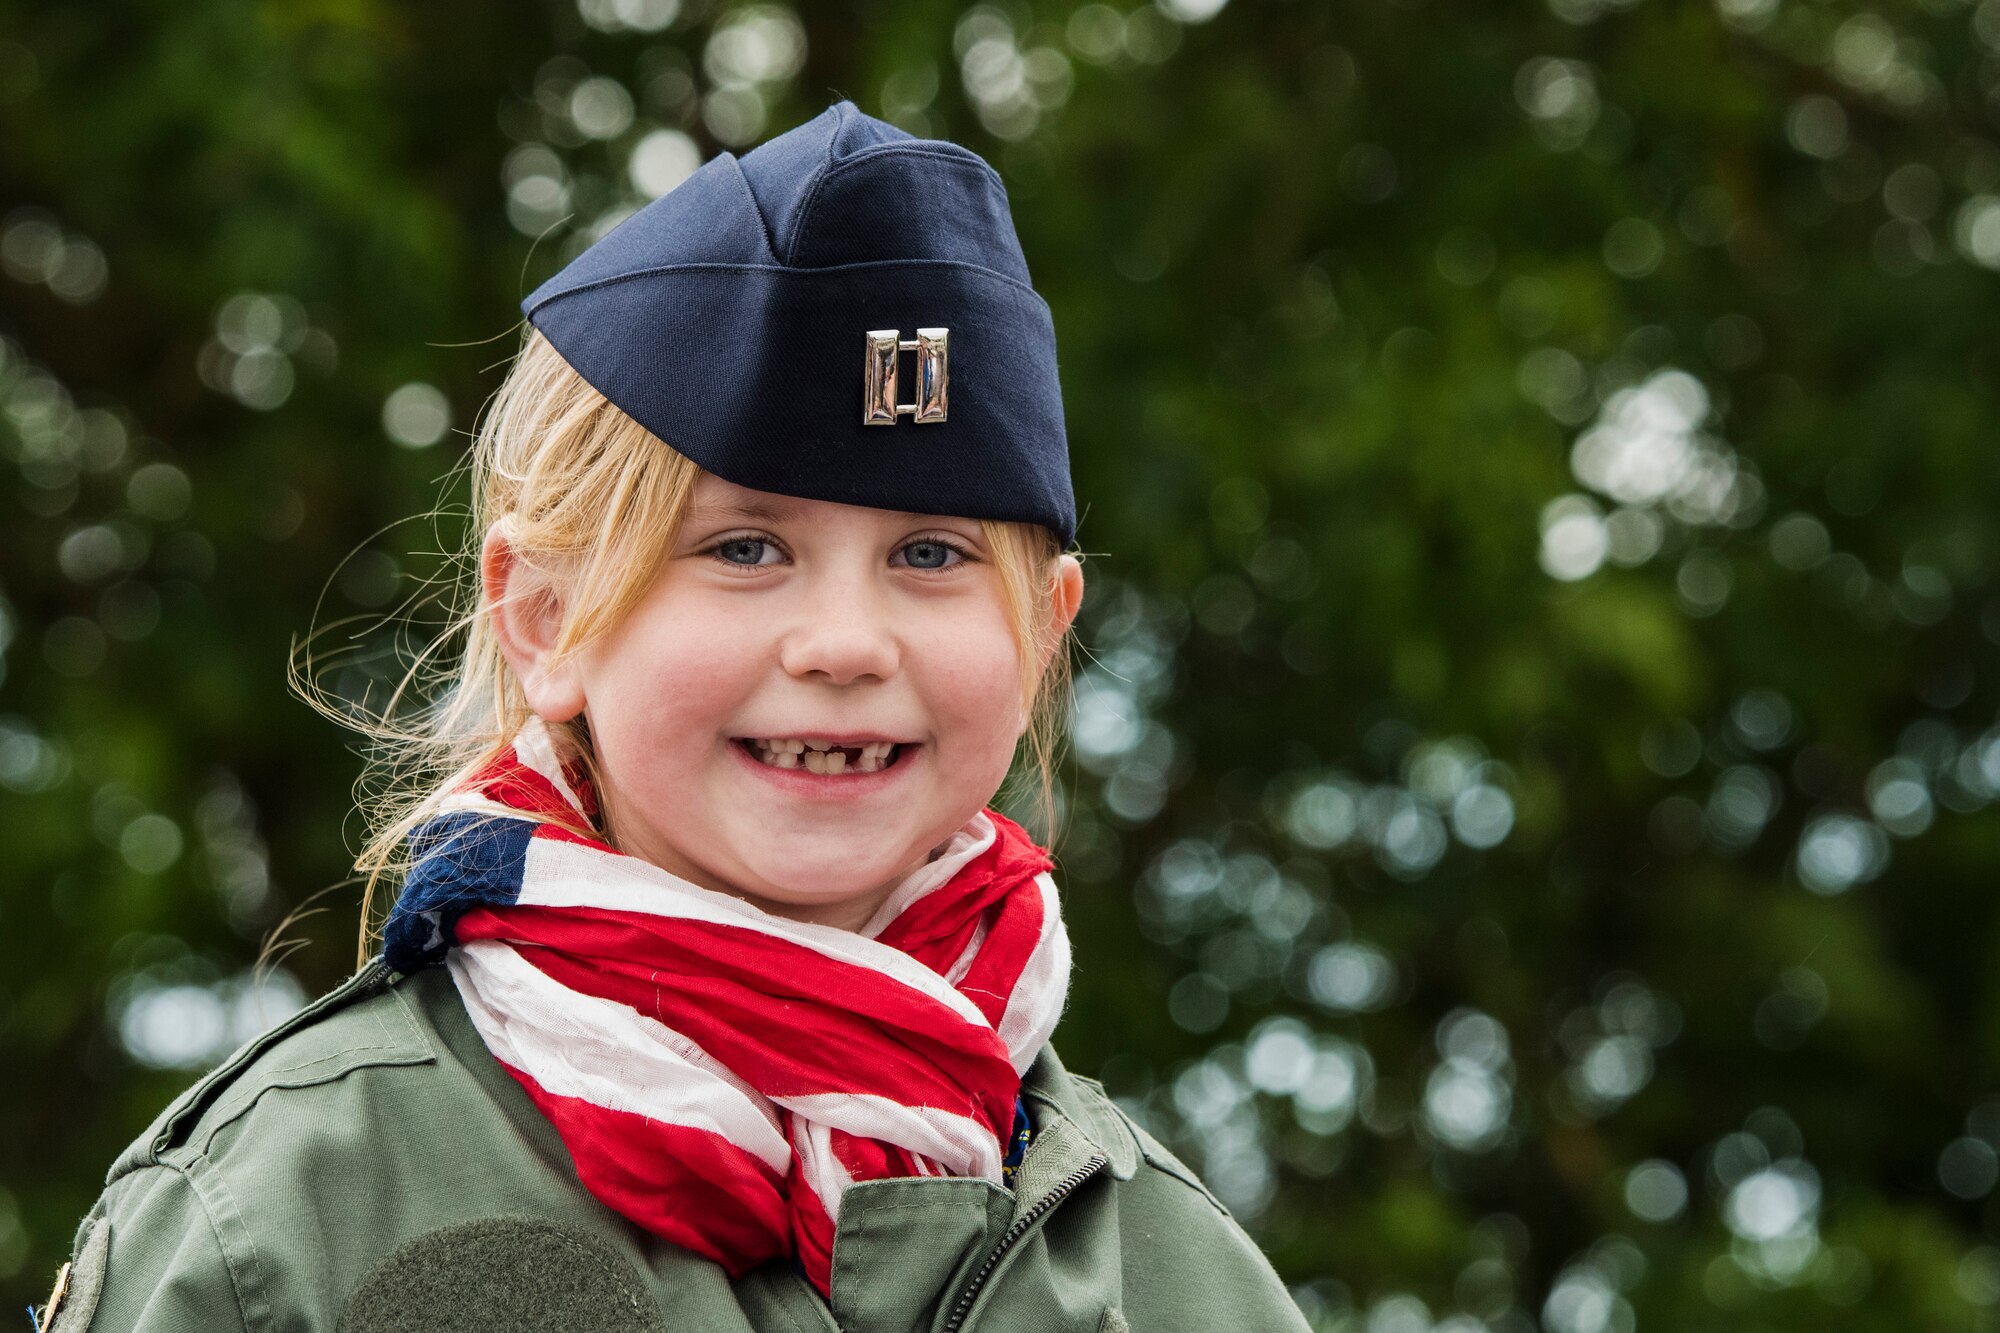 A French child smiles for a photo following the conclusion of a ceremony held in honor of all airborne troops and flight crew that served on D-Day in Picauville, France, June 4, 2019. The ceremony’s guest speaker, U.S. Air Force Maj. Gen. John B. Williams, United States Air Forces in Europe and Air Forces Africa mobilization assistant to the commander, said how real the memories of D-Day are for families living in Normandy, France, as if it happened yesterday. Williams said it’s very gratifying to know the events that transpired 75 years ago will be remembered well into the future in large part because of the French effort to ensure the memories of D-Day remain eternal. (U.S. Air Force photo by Senior Airman Kristof J. Rixmann)